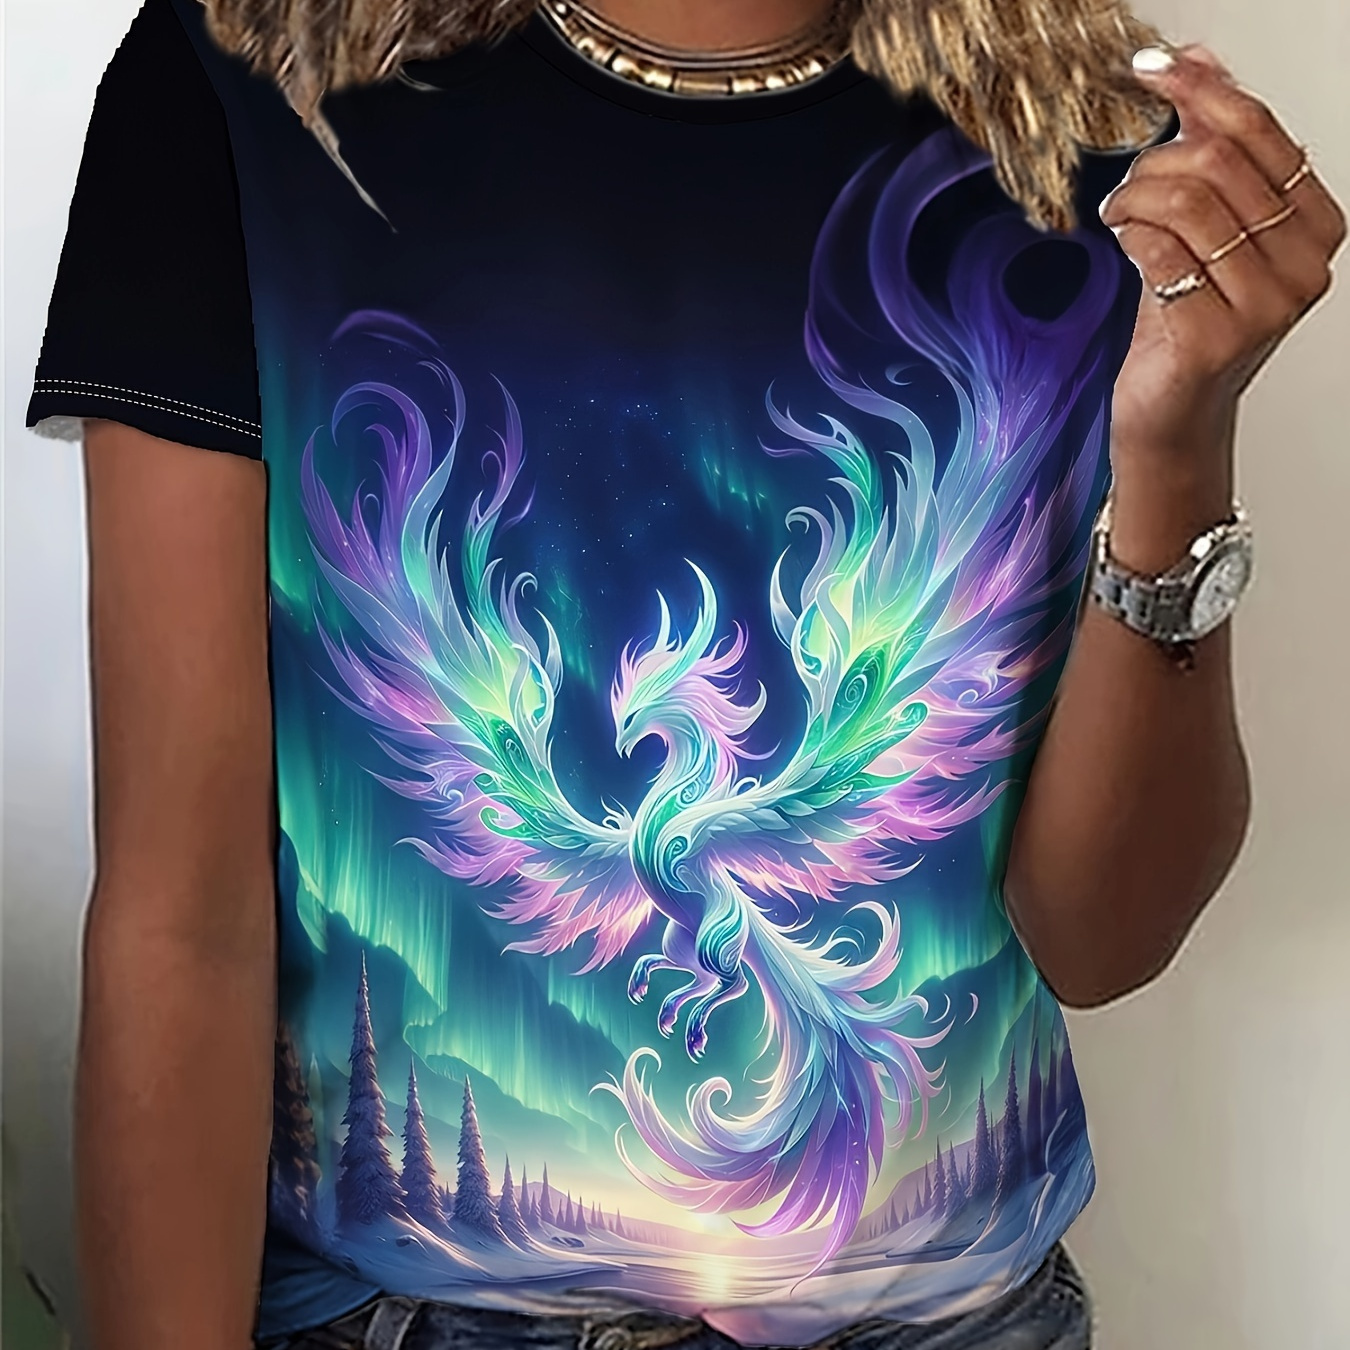 

Colorful Dragon Print Casual T-shirt, Crew Neck Short Sleeve Top For Spring & Summer, Women's Clothing